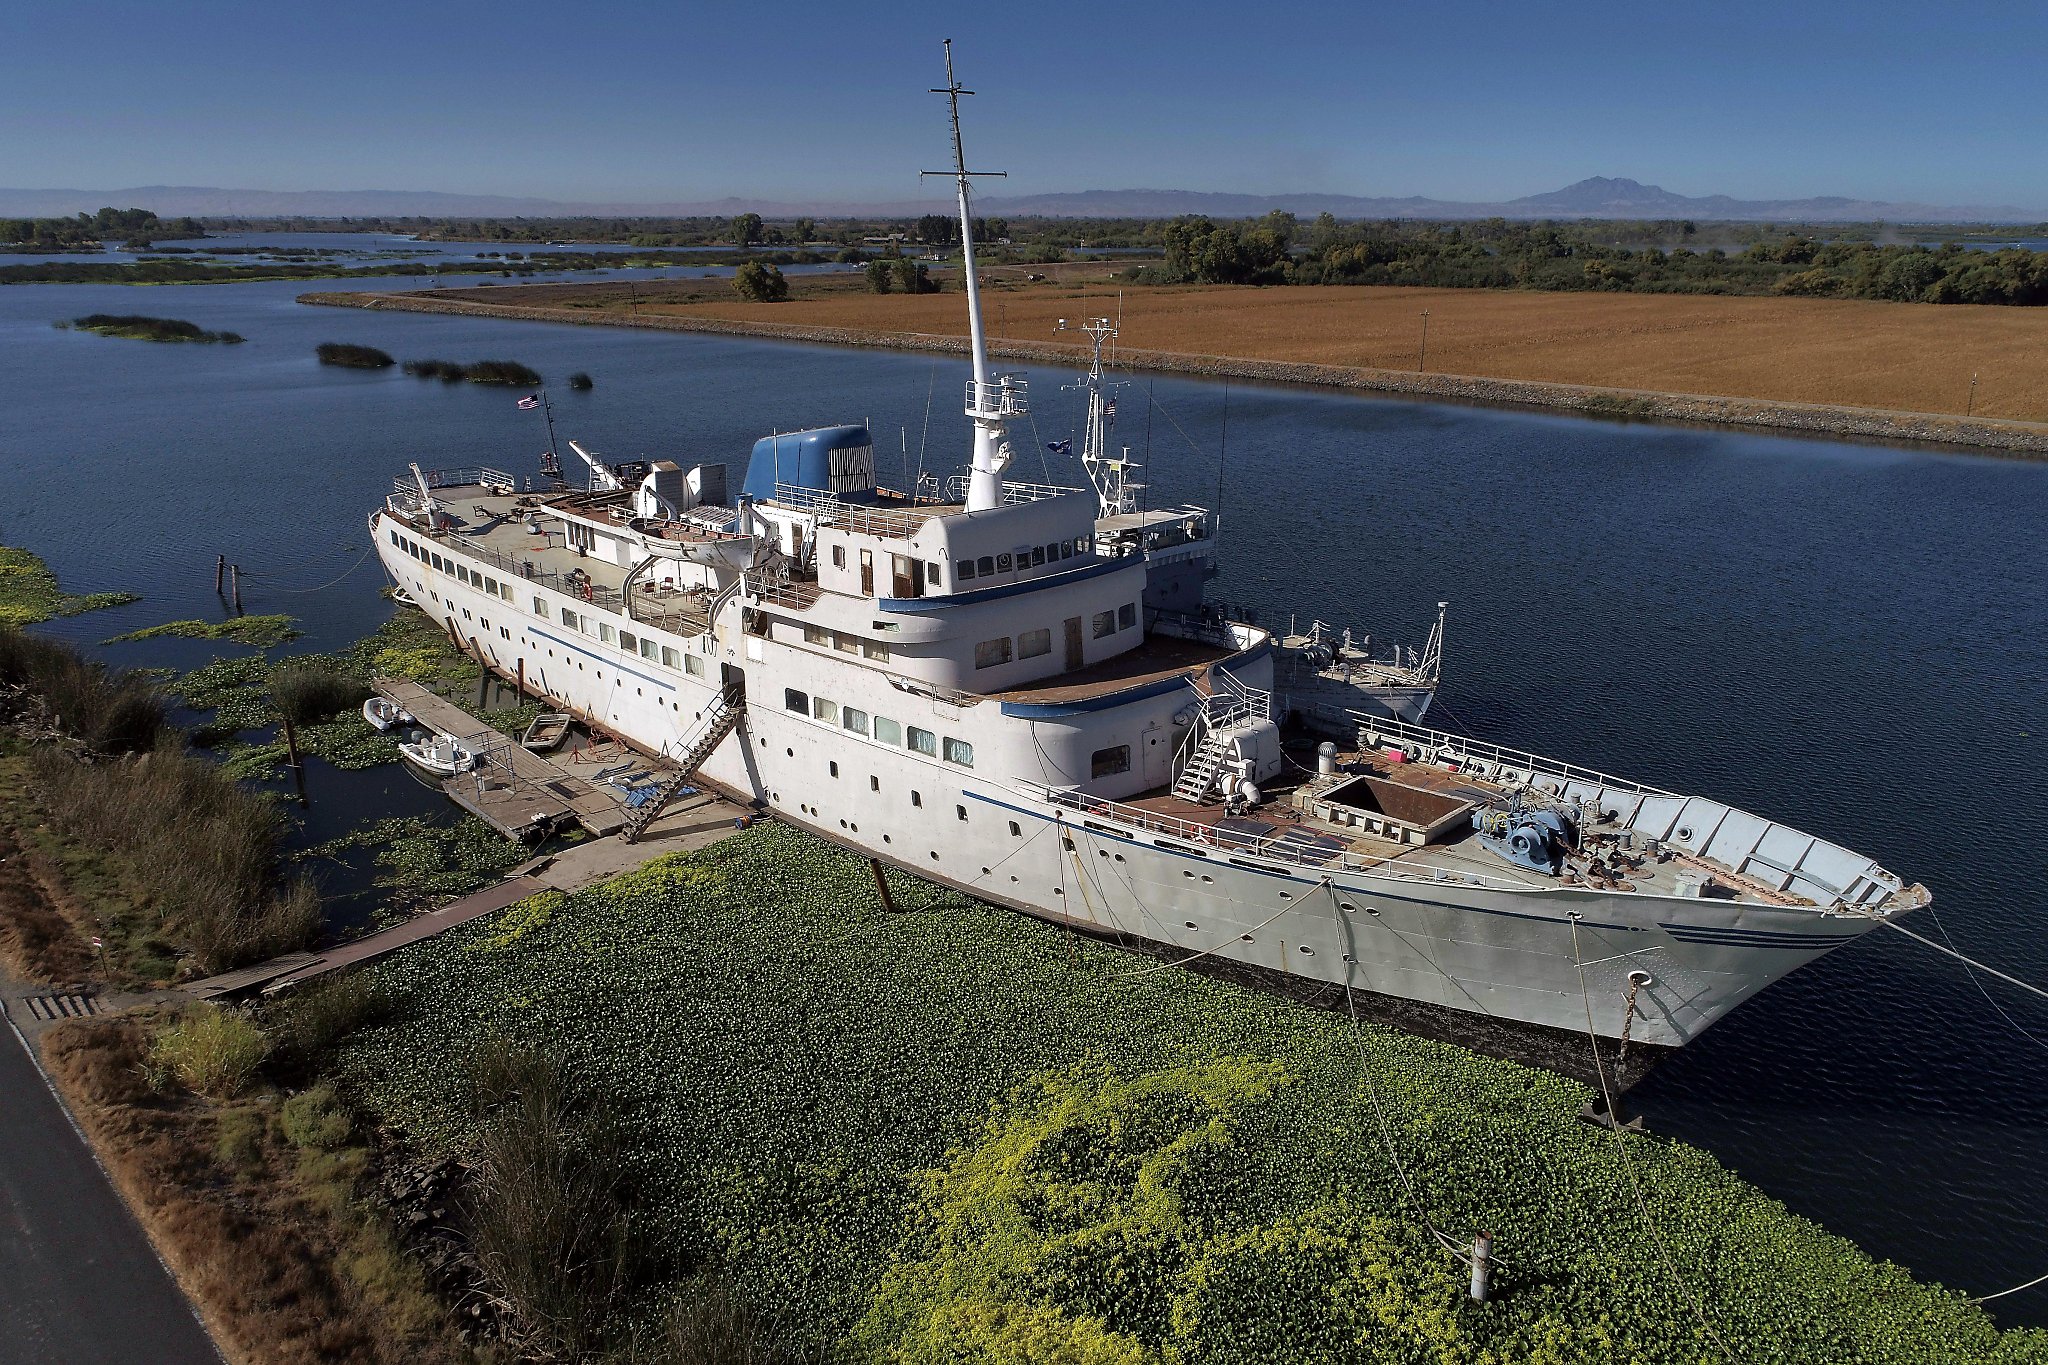 He lives in a 65-year-old cruise ship idling in the California Delta